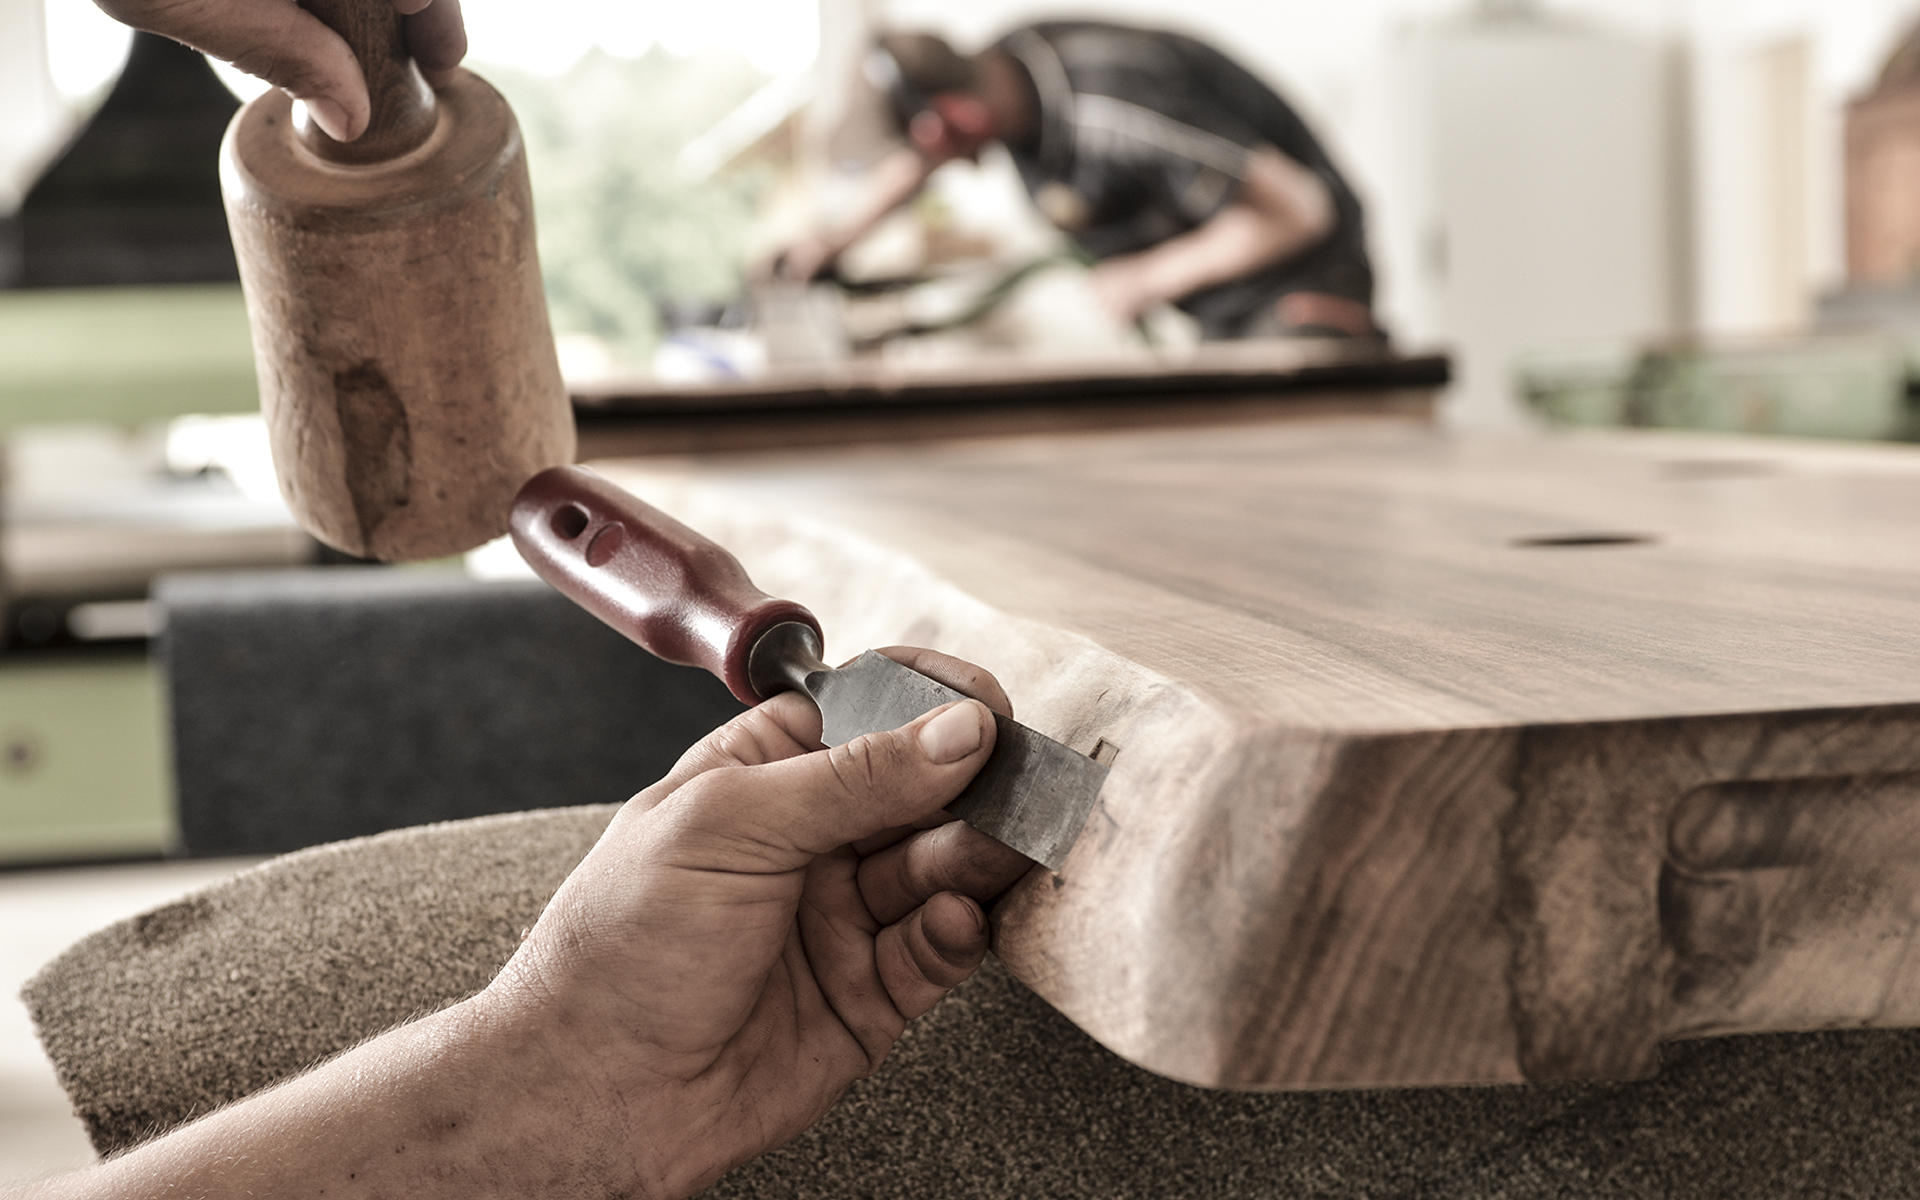 With a lot of manual work, expertise and sensitivity, unique products made of wood are created at Stammdesign